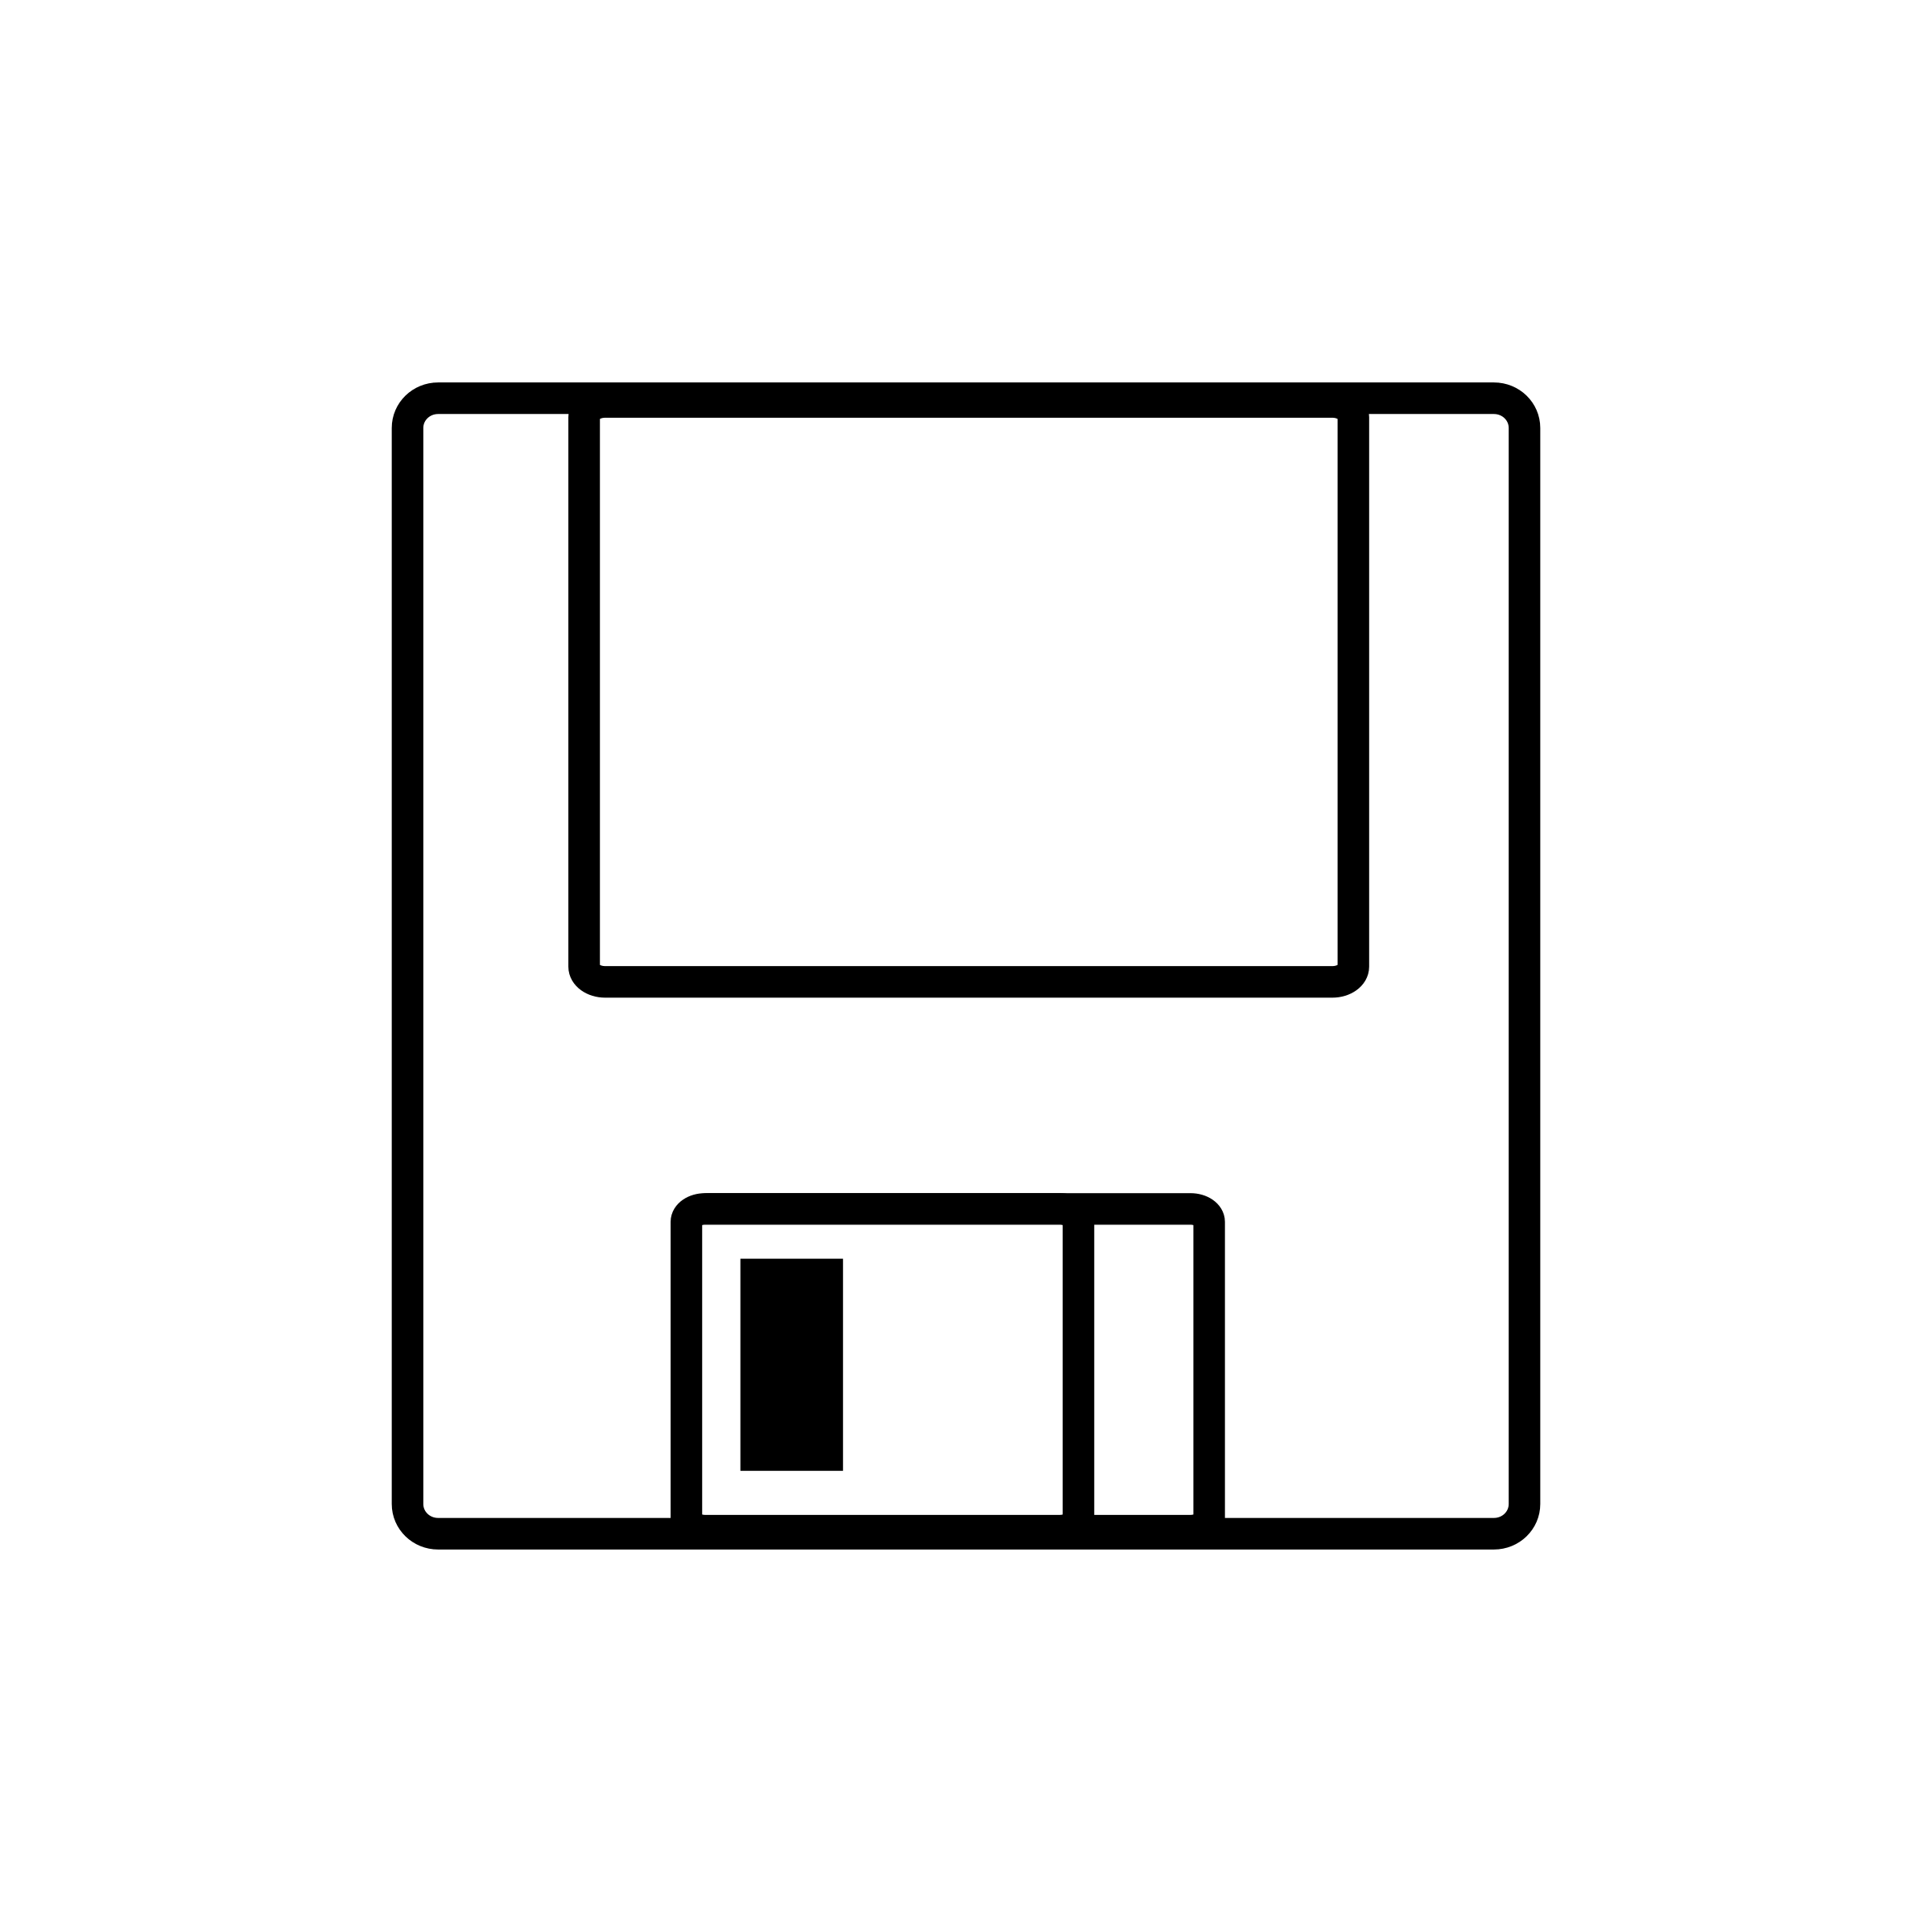 Floppy-disk icons | Noun Project